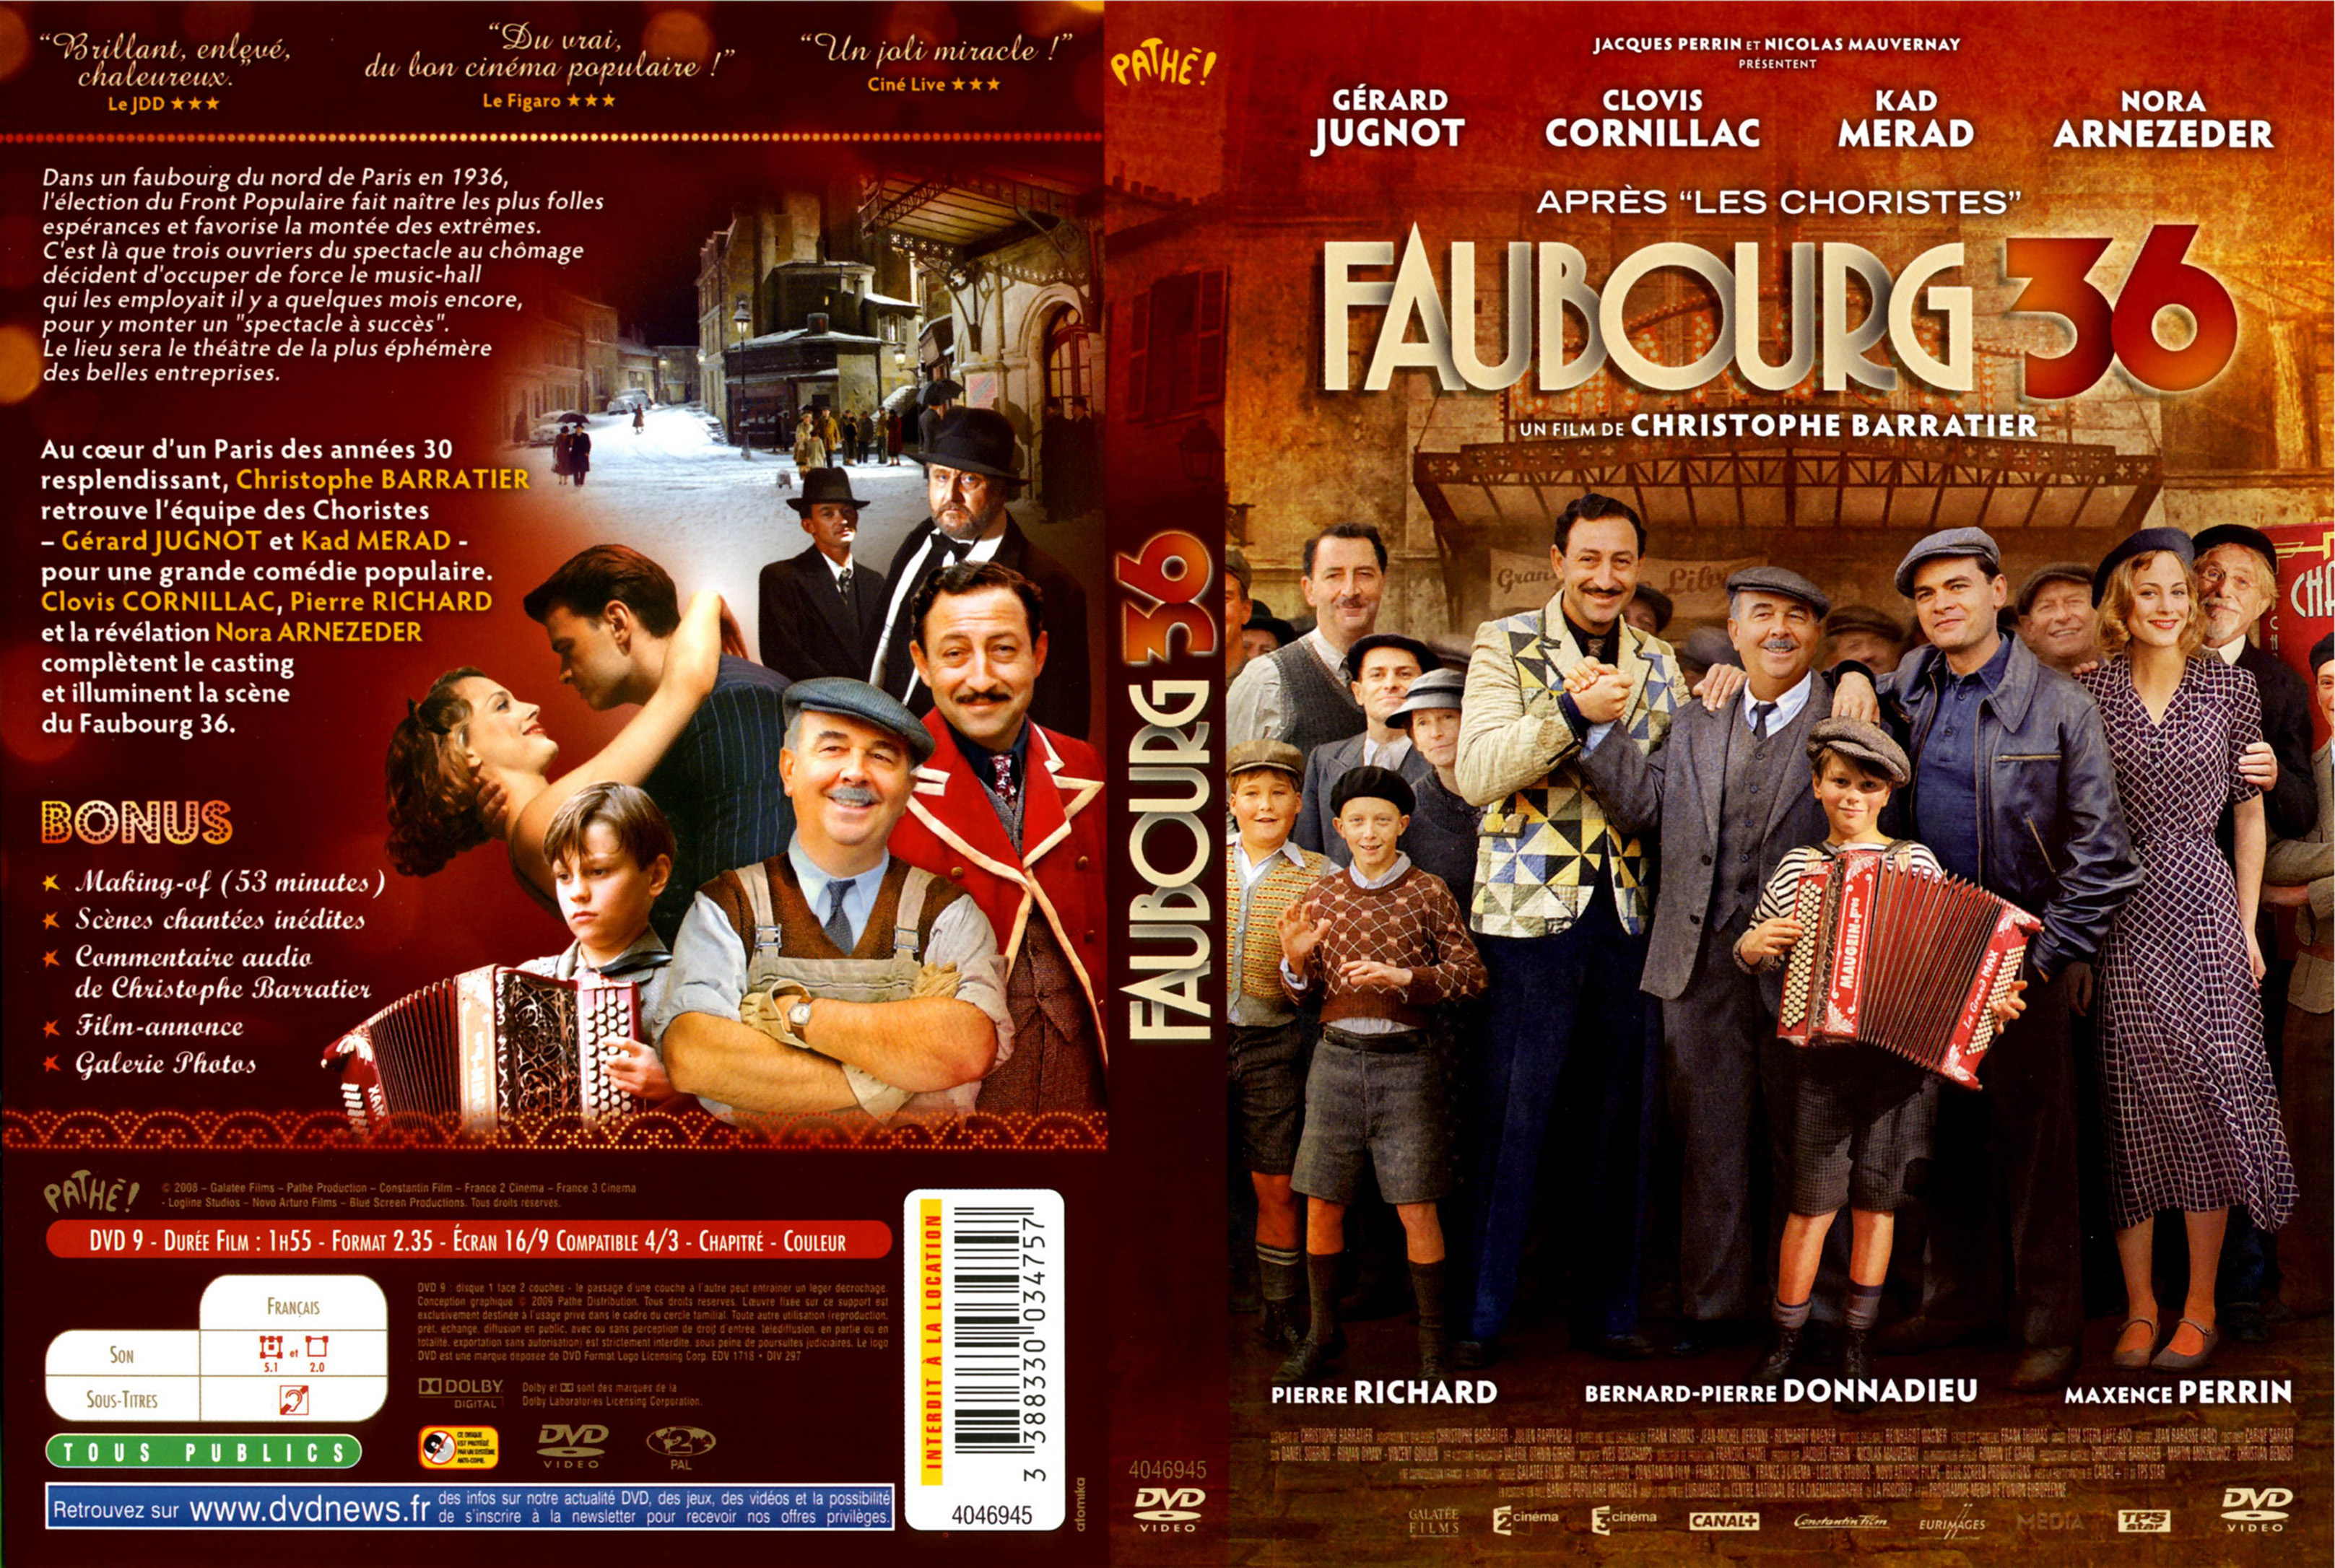 Jaquette DVD Faubourg 36